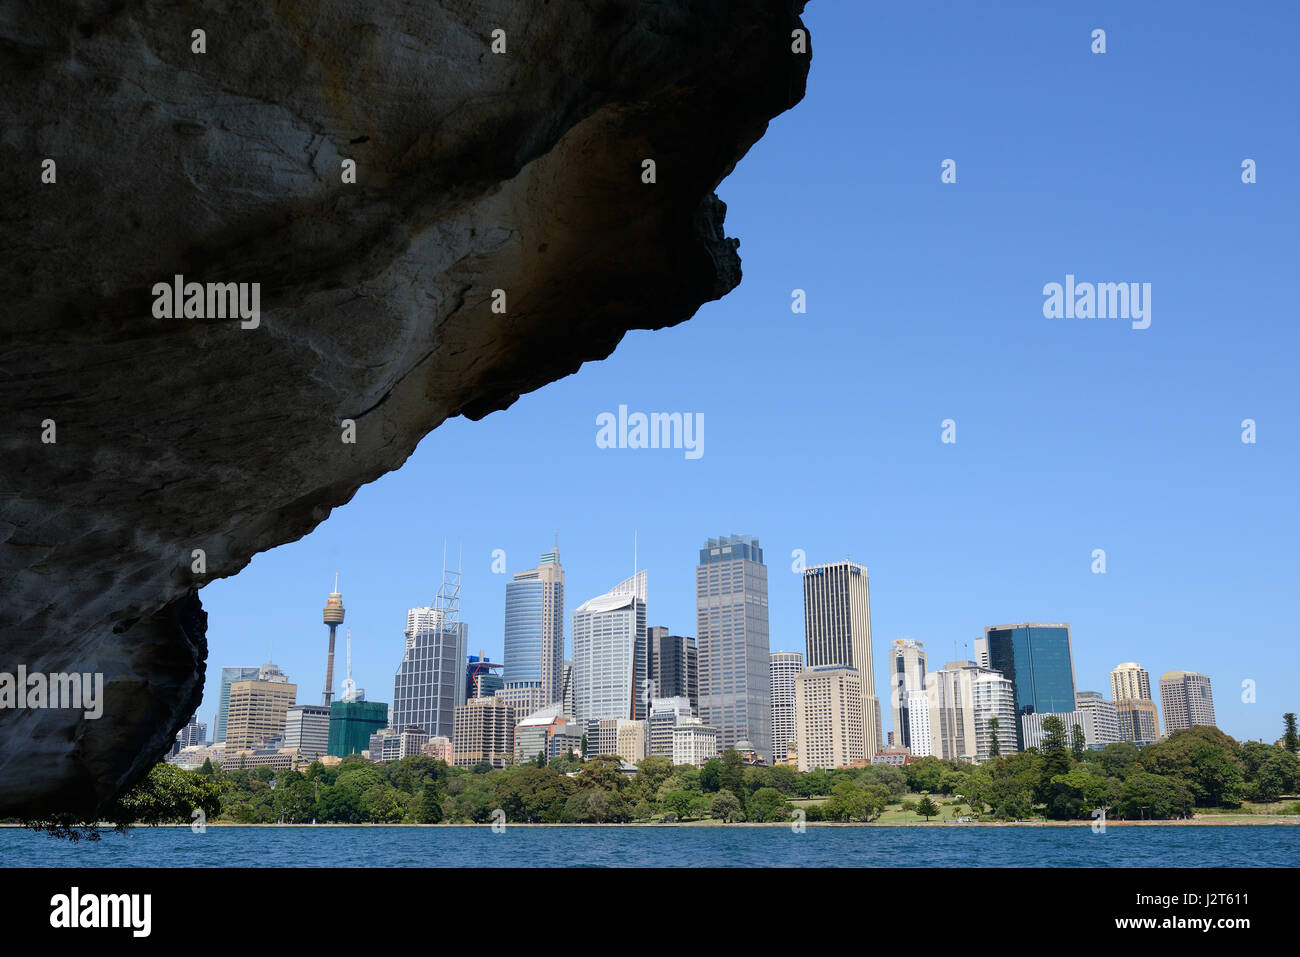 Skyline of Sydney's highrises framed by a rocky overhang. New South Wales, Australia. Stock Photo